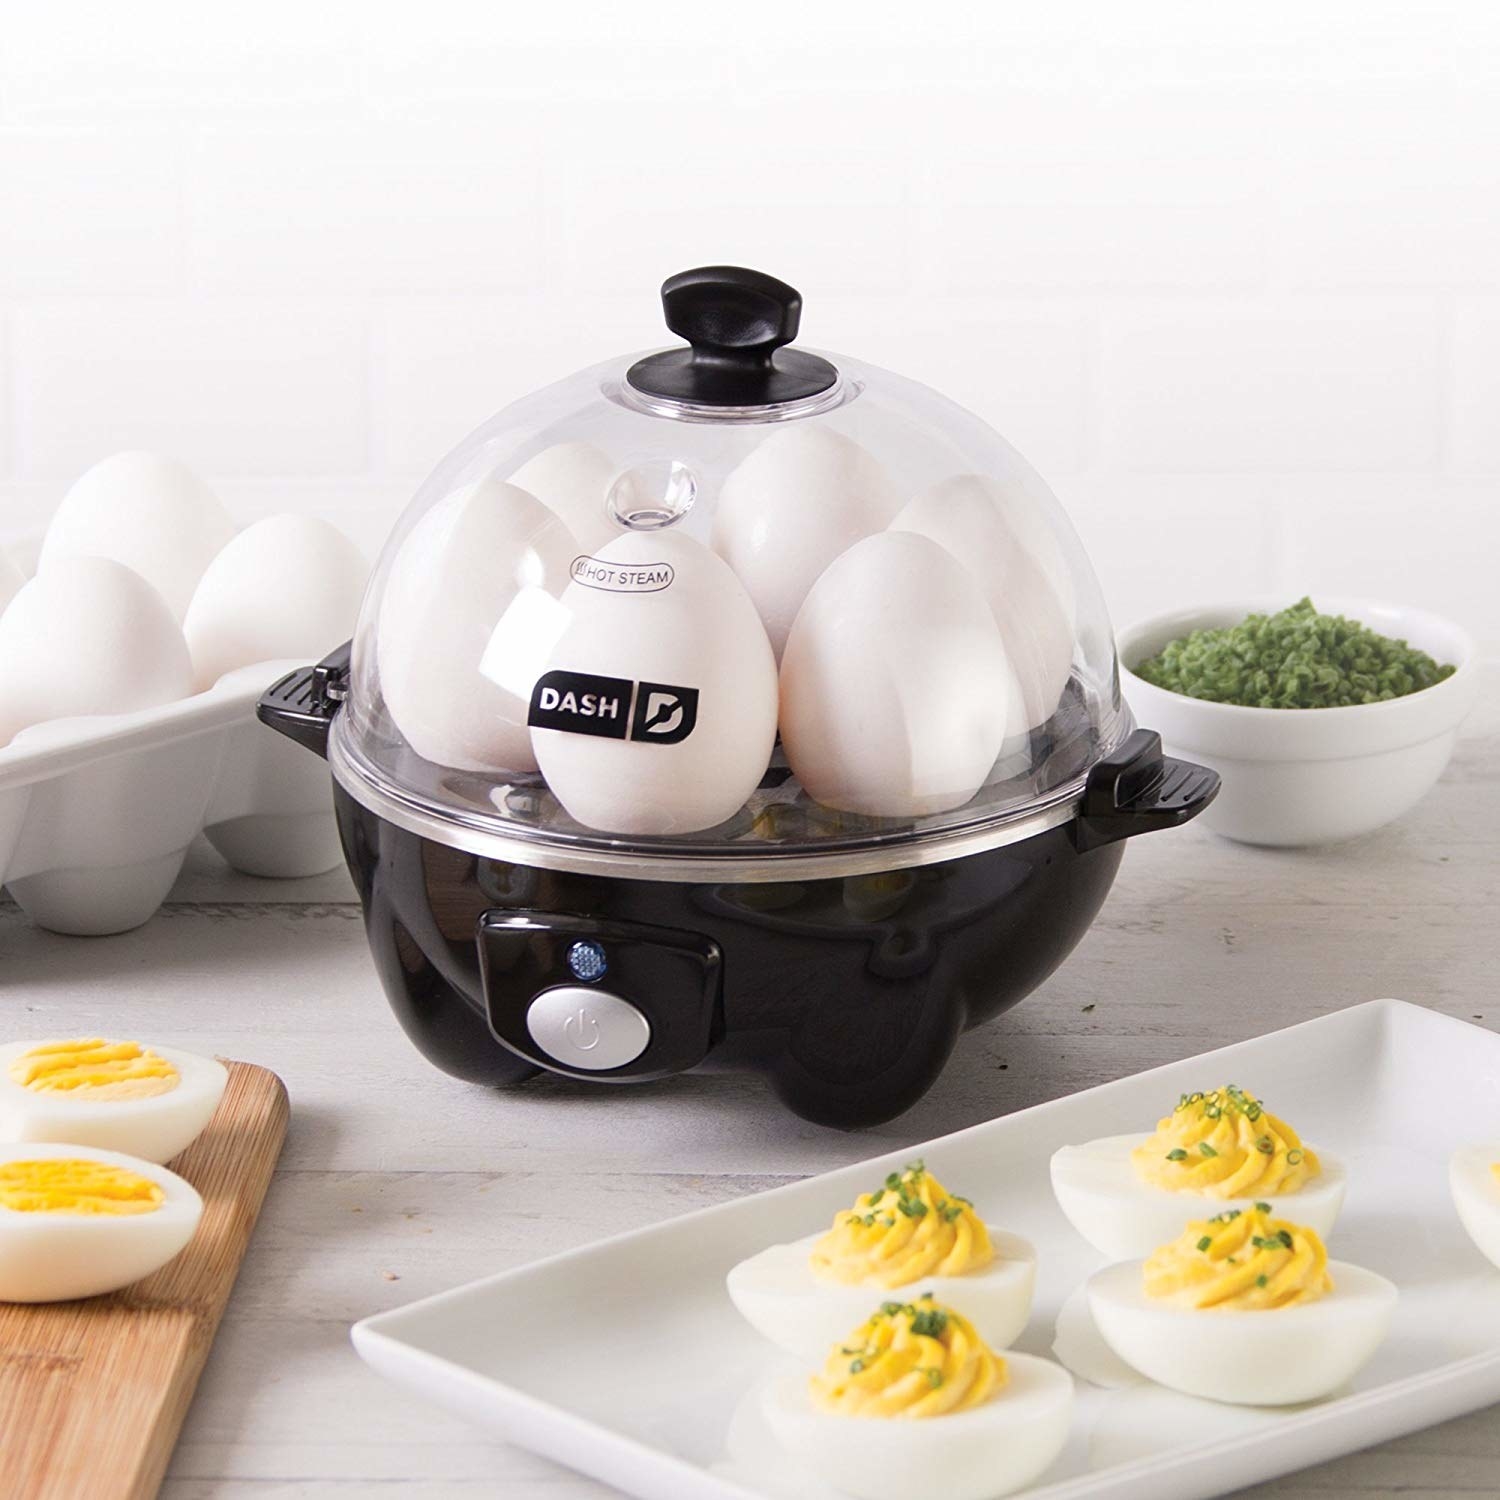 A egg-cooking machine with six eggs in the center and lid over top